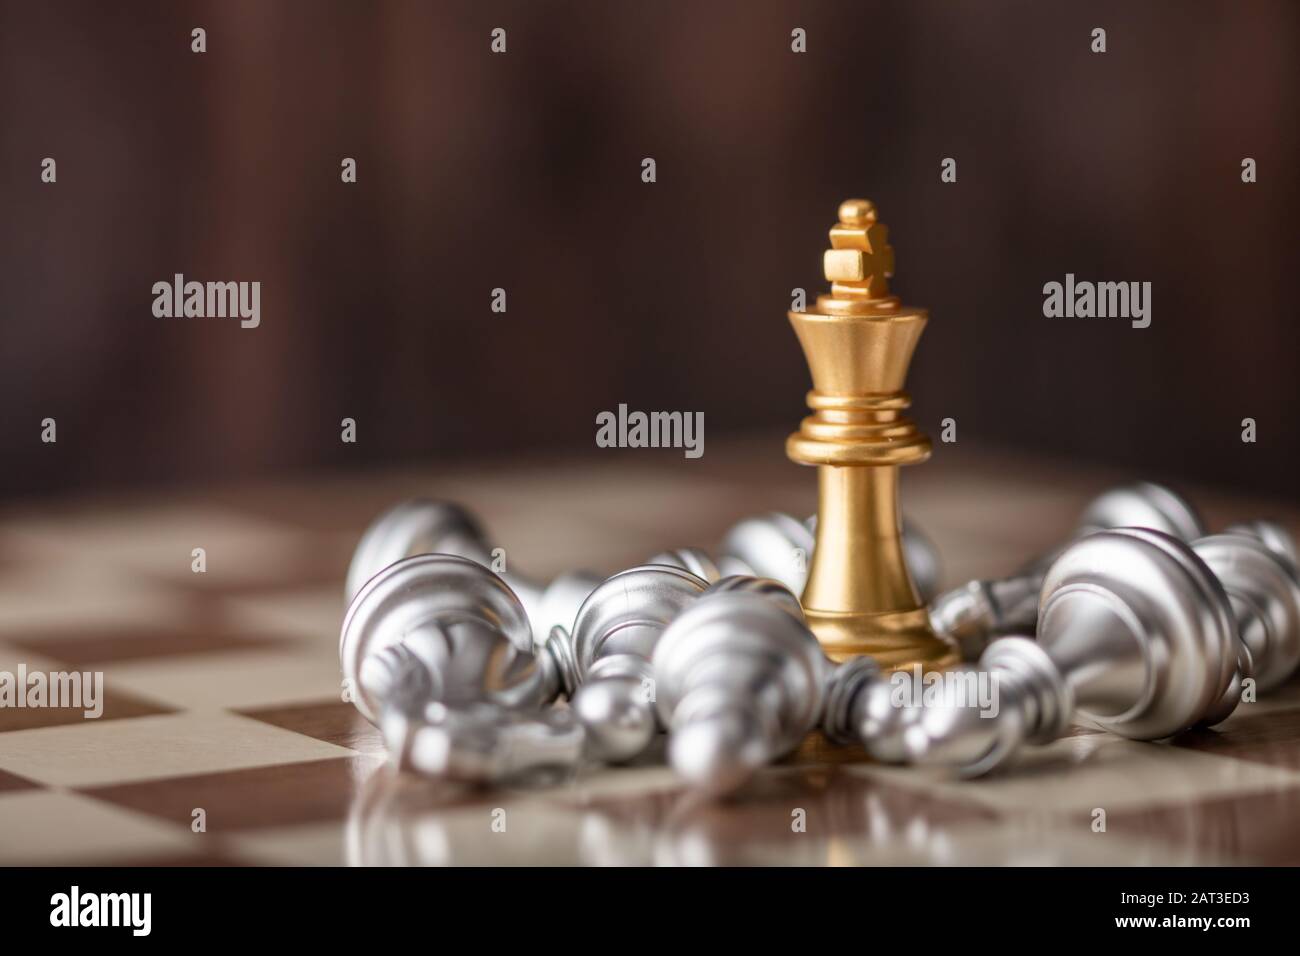 gold king standing in the midst of falling chess on board Stock Photo